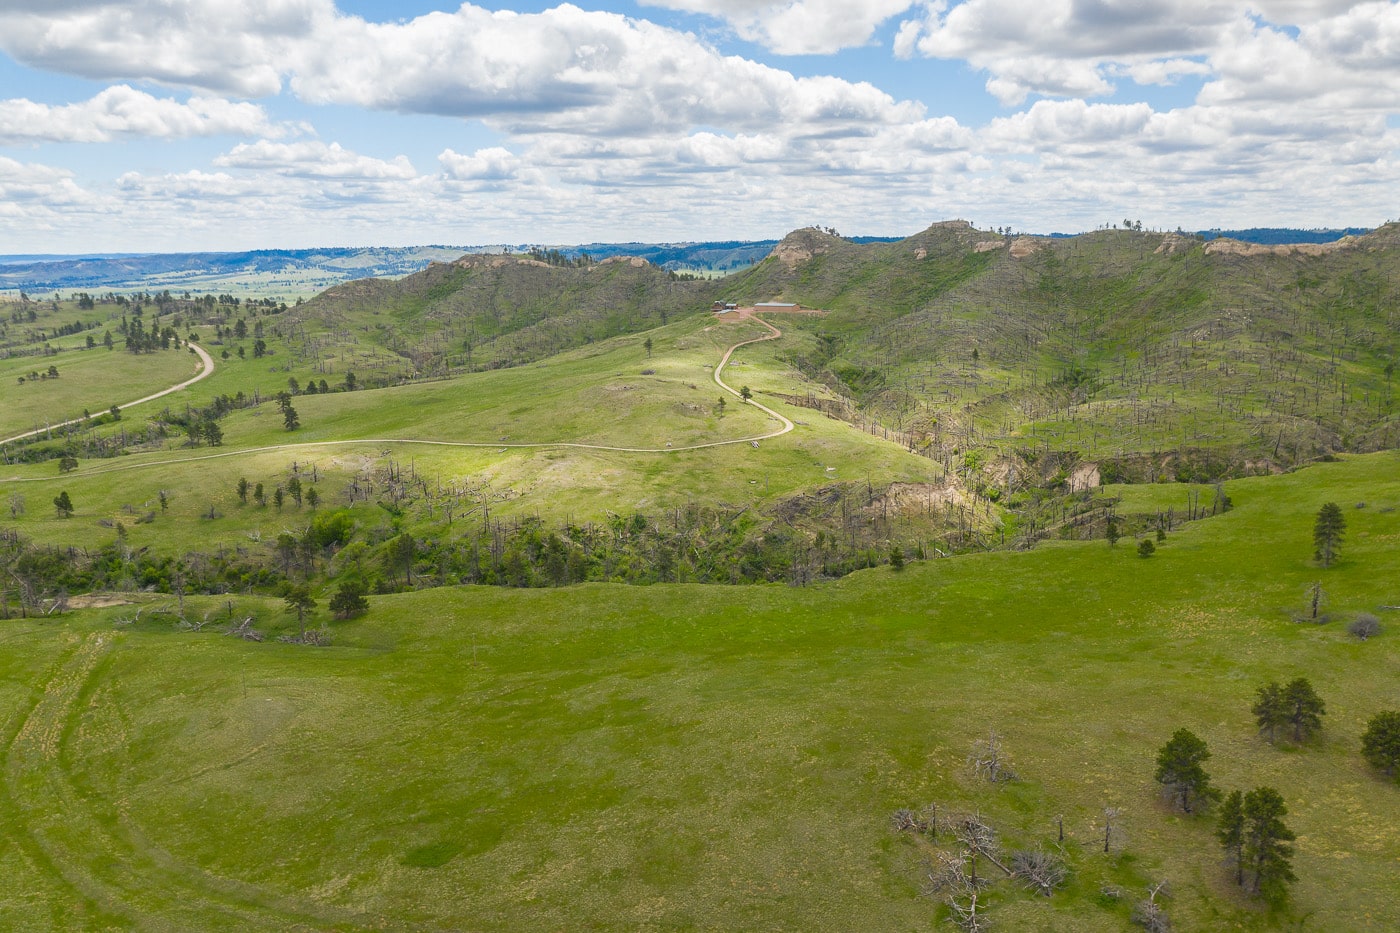 differing topography of large acreage ranch